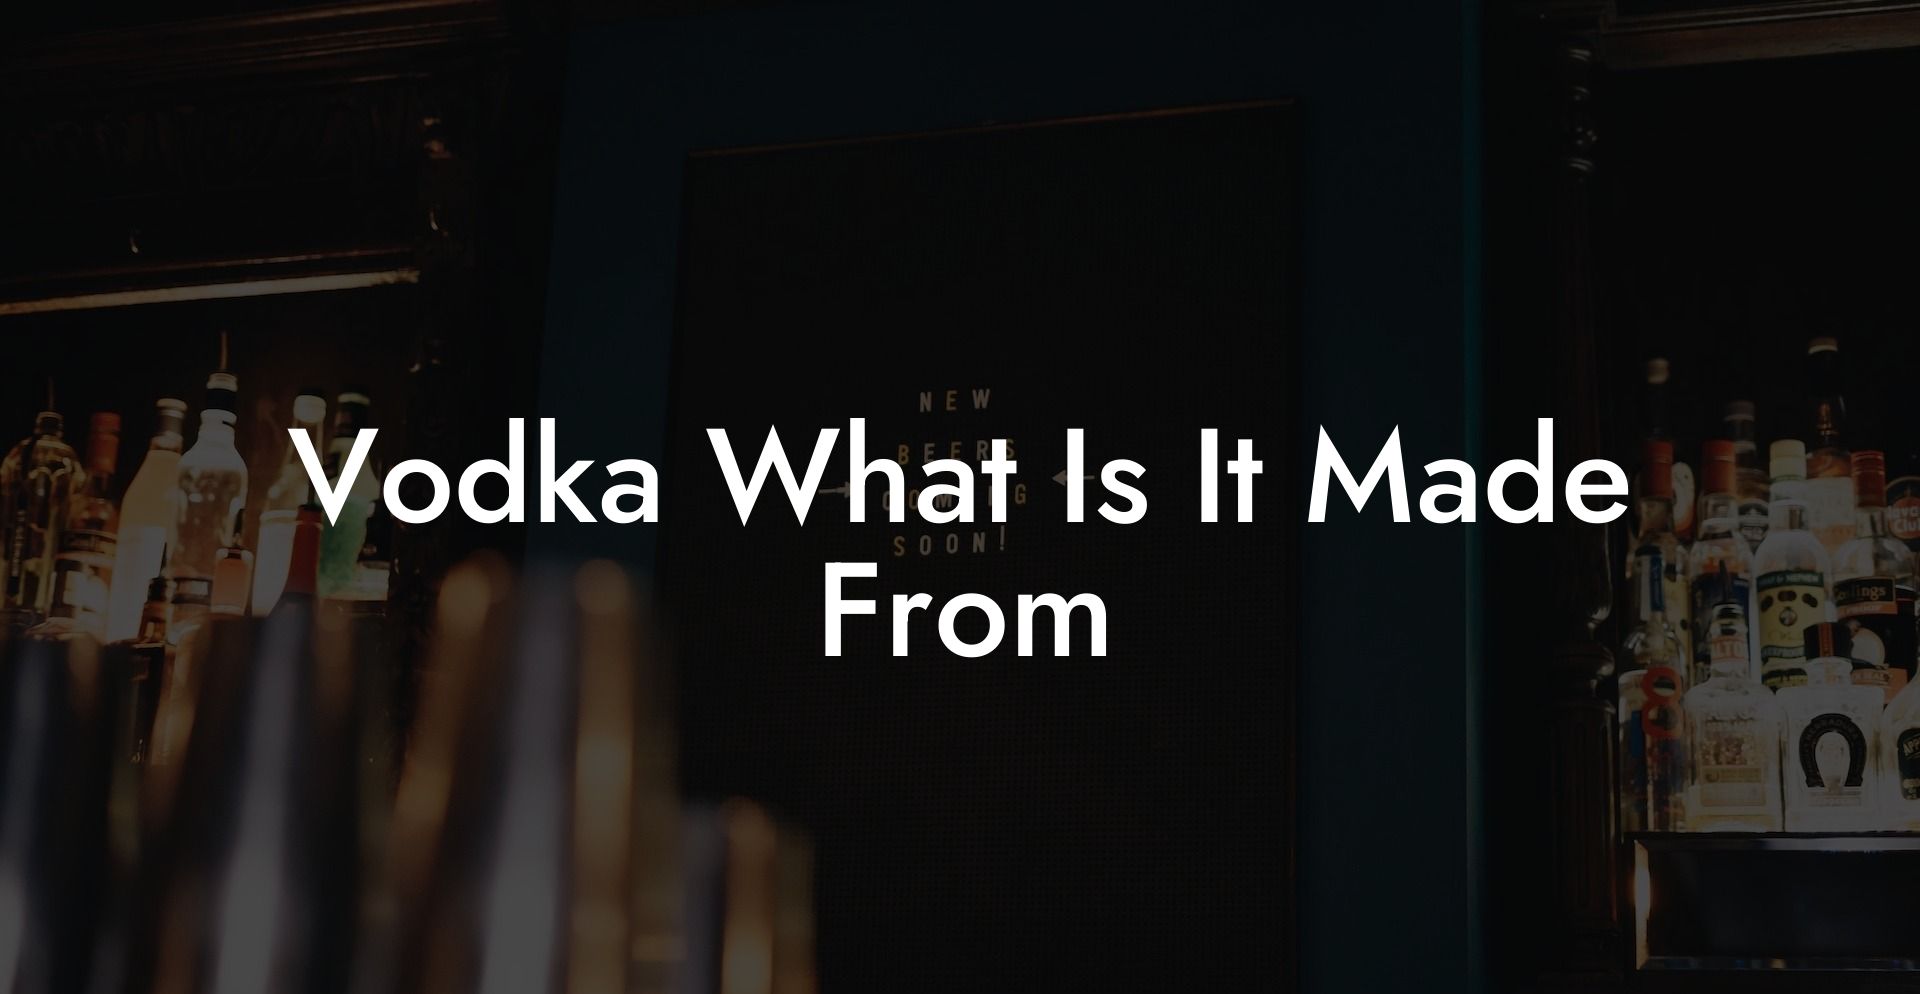 Vodka What Is It Made From